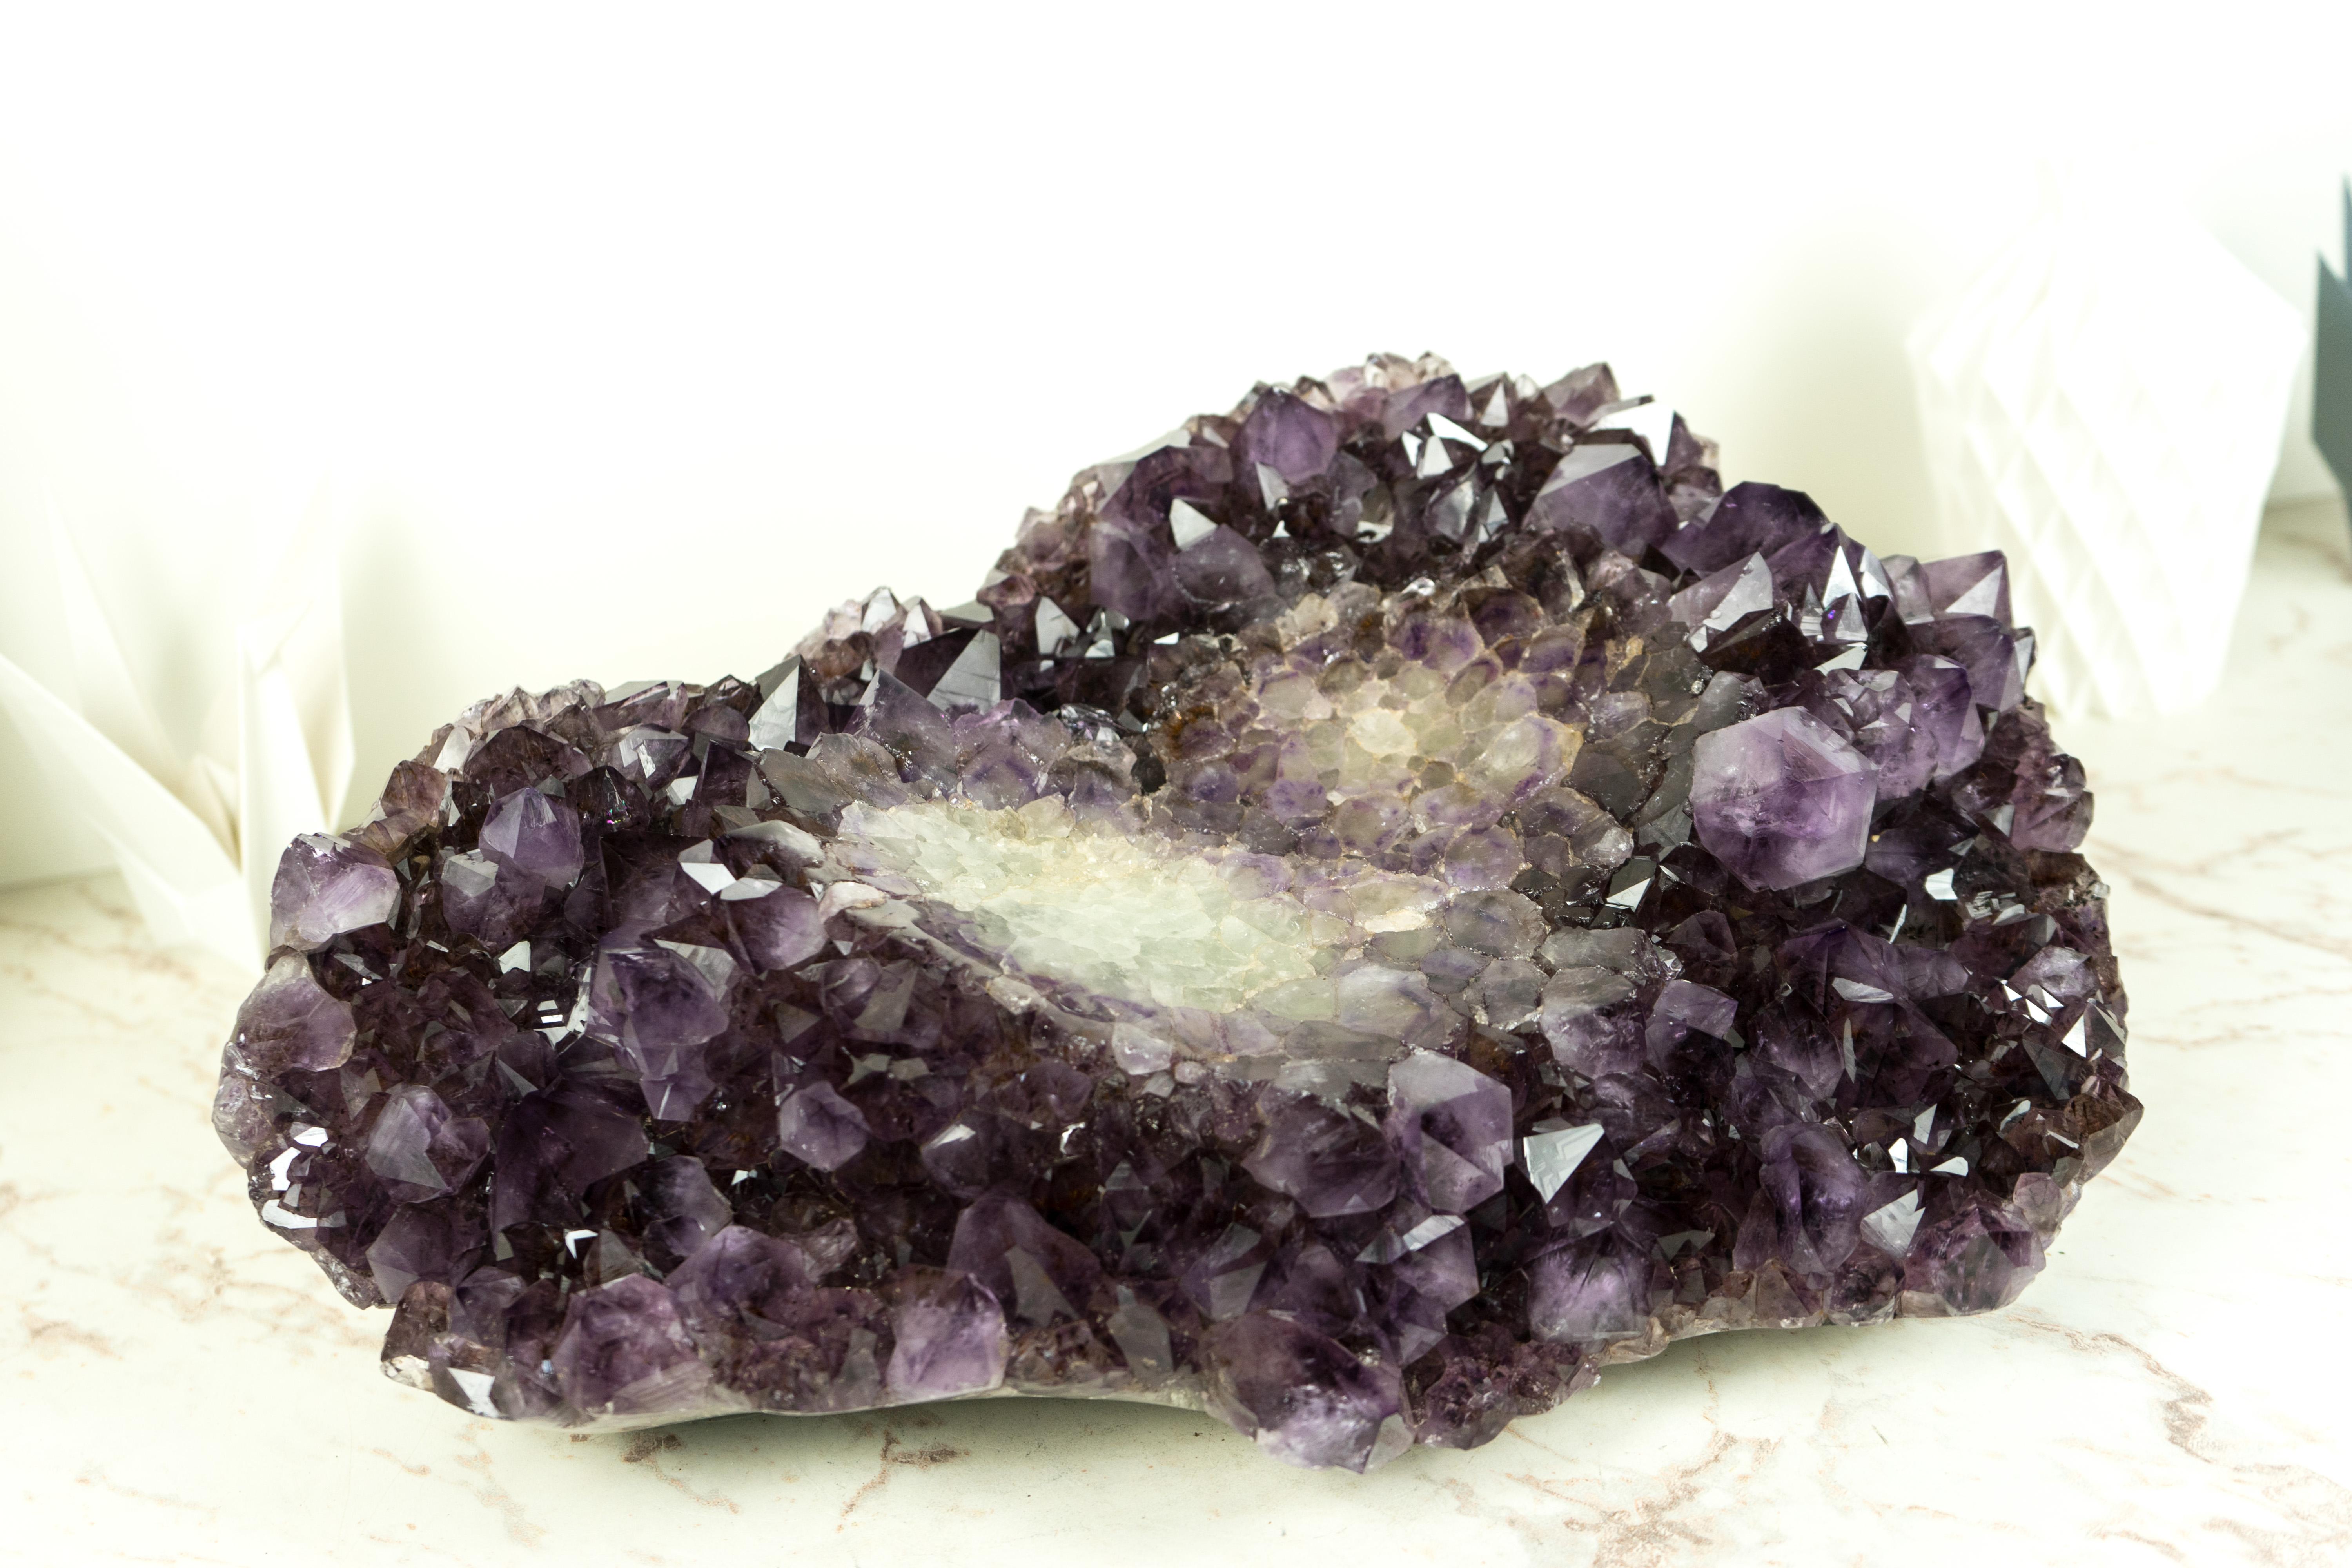 Hand-carved from a unique X-Large Amethyst Cluster that was meant to become a decorative bowl, this Amethyst will beautifully enhance your home or workspace decor. Whether used as a place to display crystals, a decorative piece, an exquisite crystal